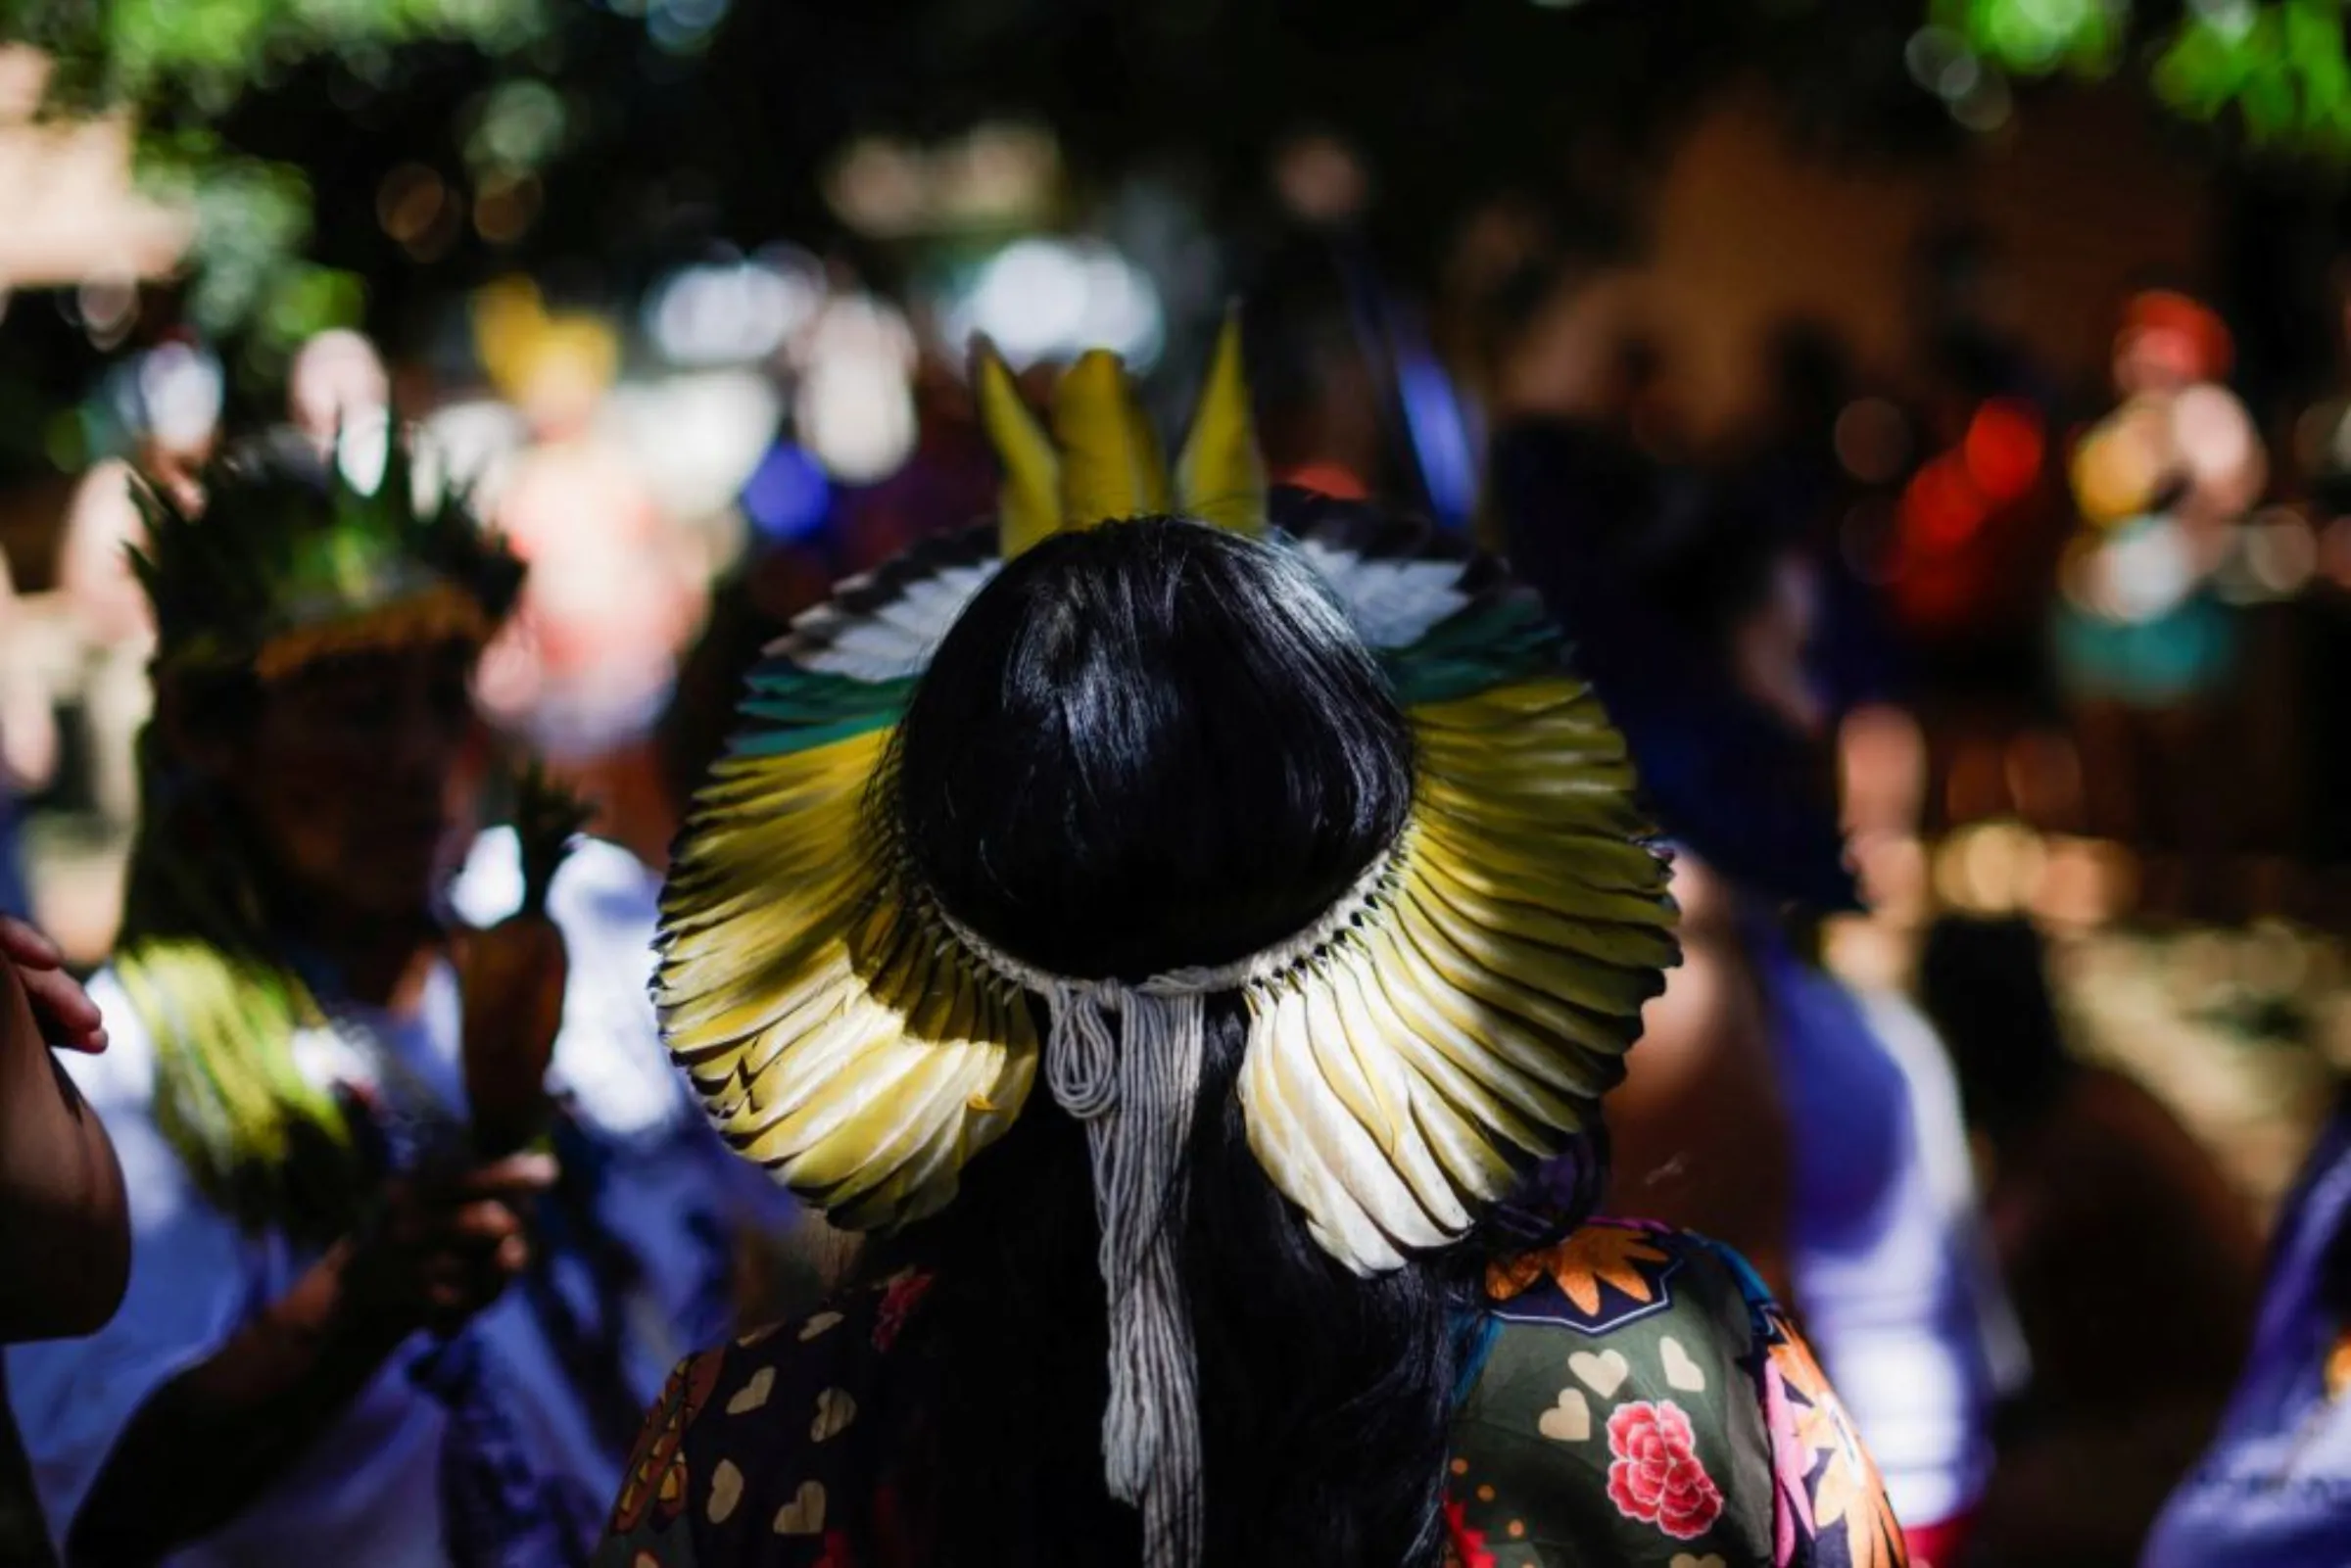 Brazilian indigenous women perform a ritual dance during the seminar of the natives of the land, indigenous women leaders, in Brasilia, Brazil October 15, 2022